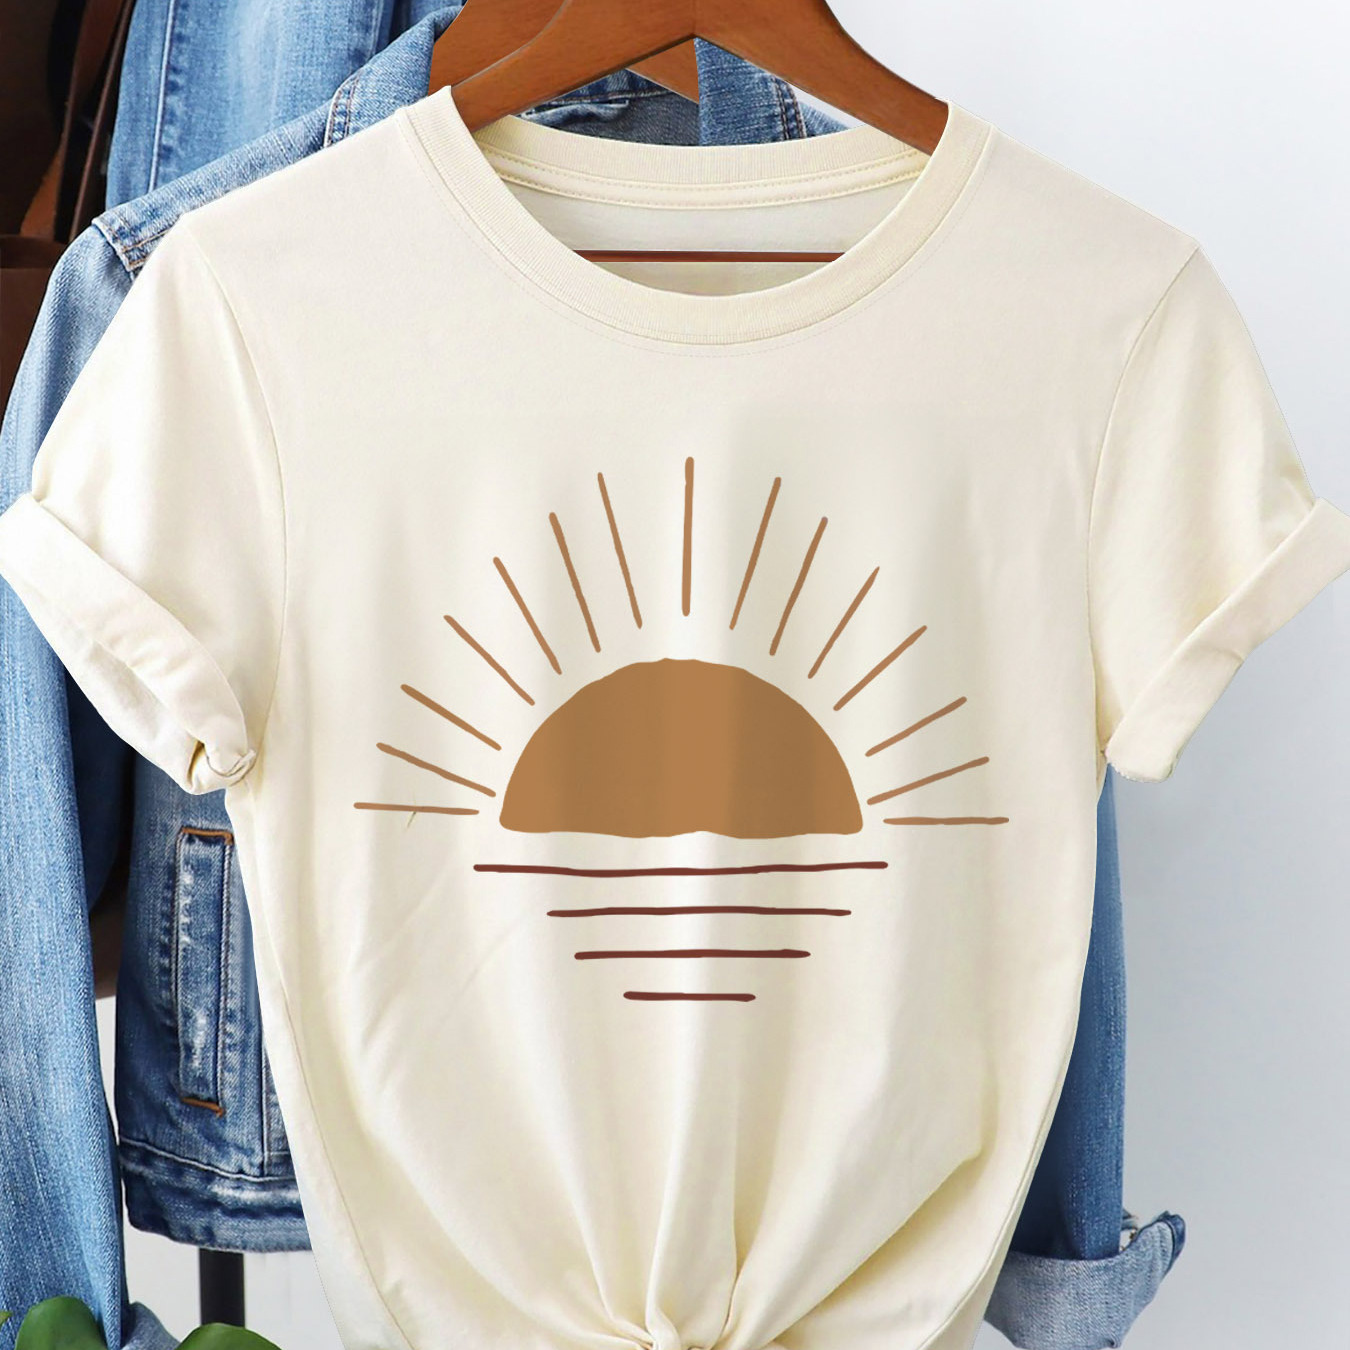 

Sun Print T-shirt, Short Sleeve Crew Neck Casual Top For Summer & Spring, Women's Clothing